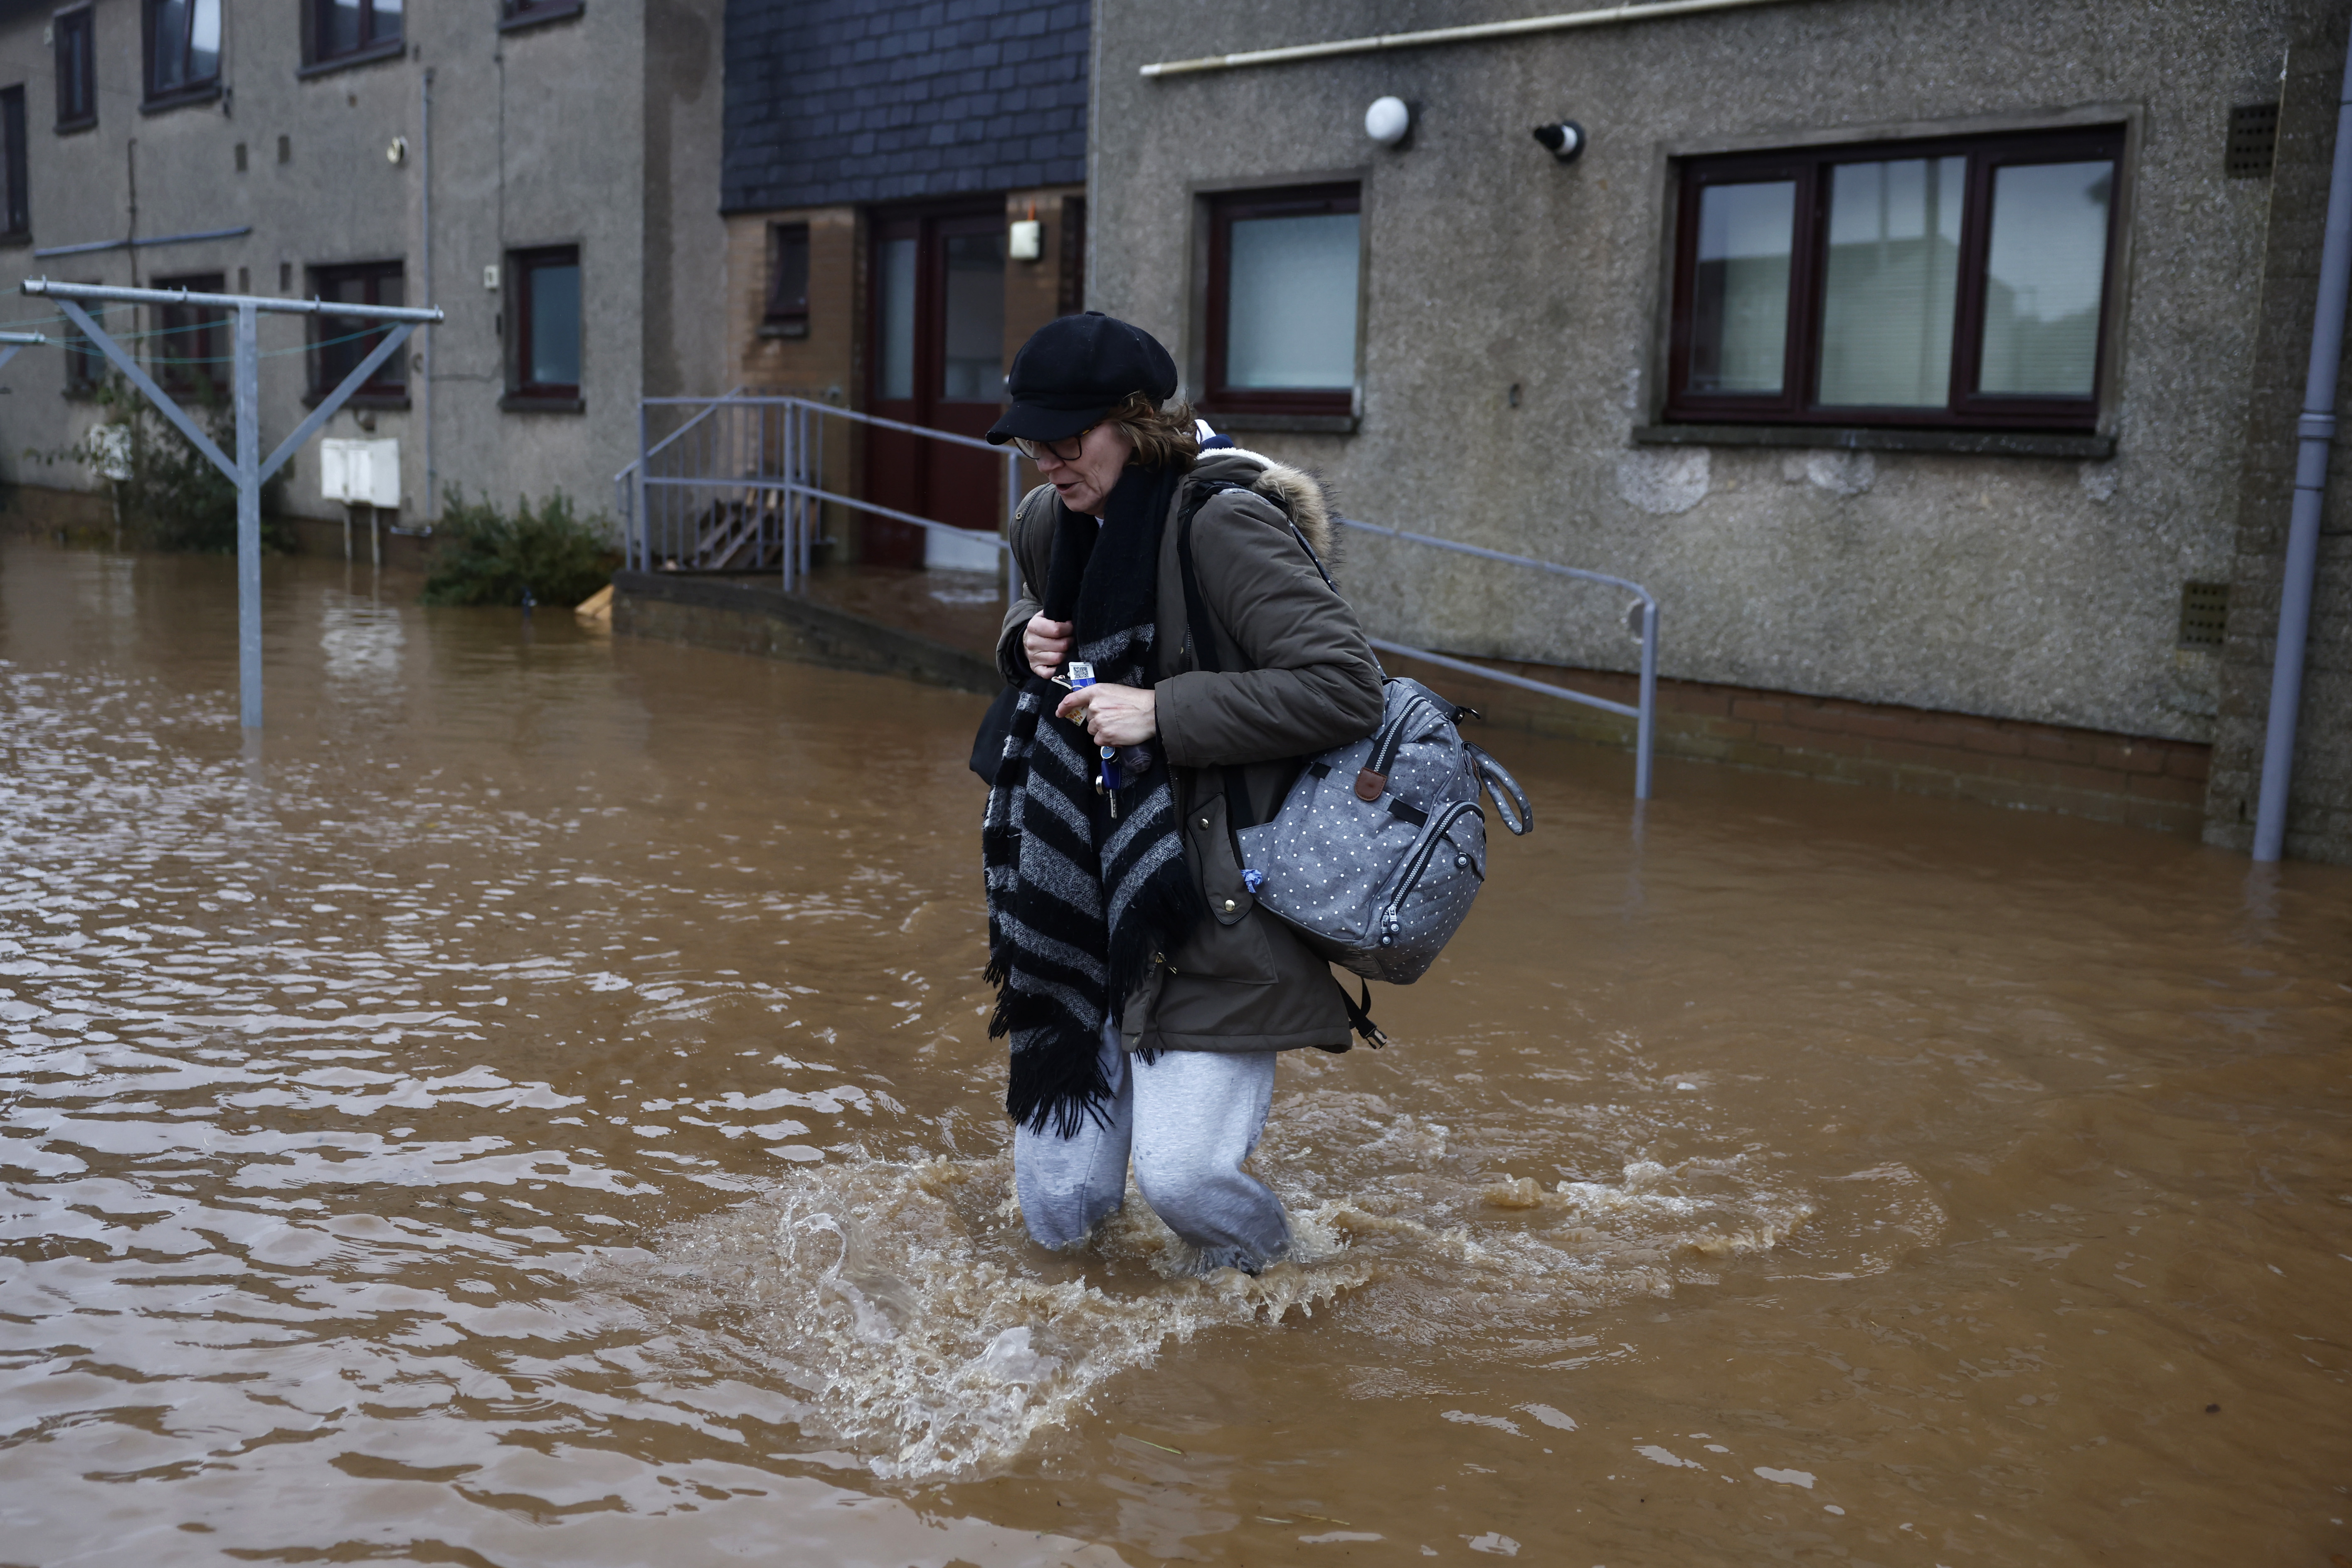 A woman wades through the flood waters near some houses in Brechin